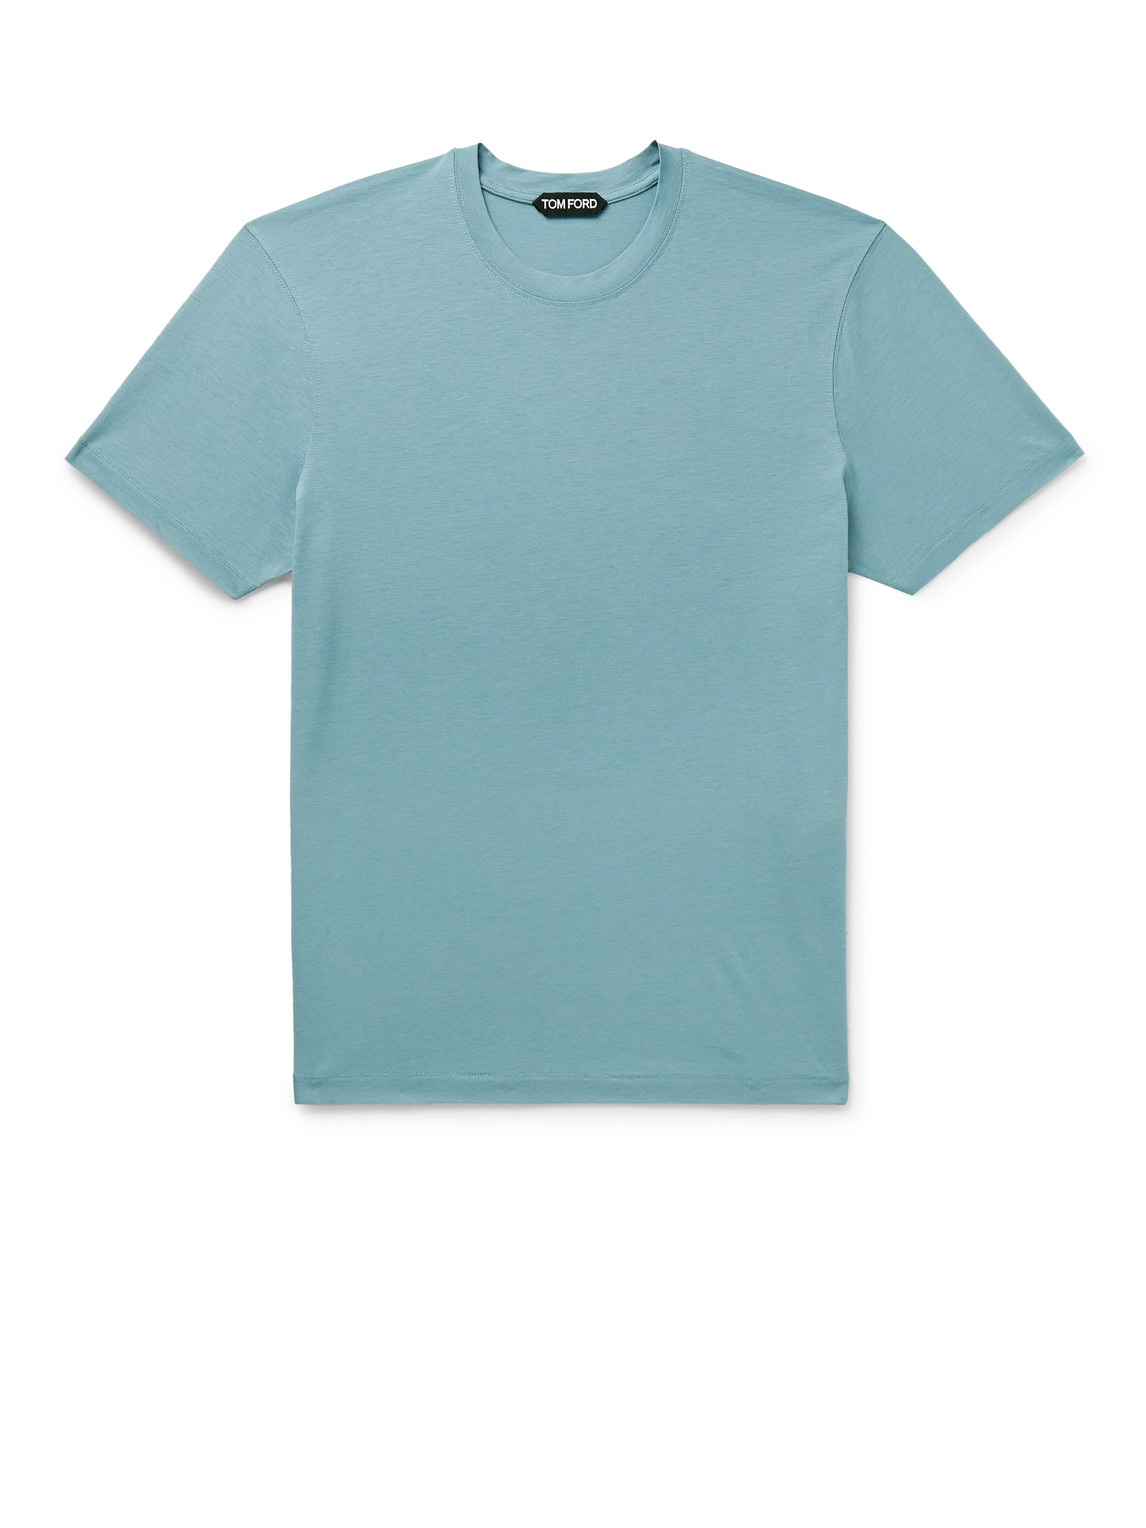 TOM FORD LYOCELL AND COTTON-BLEND JERSEY T-SHIRT